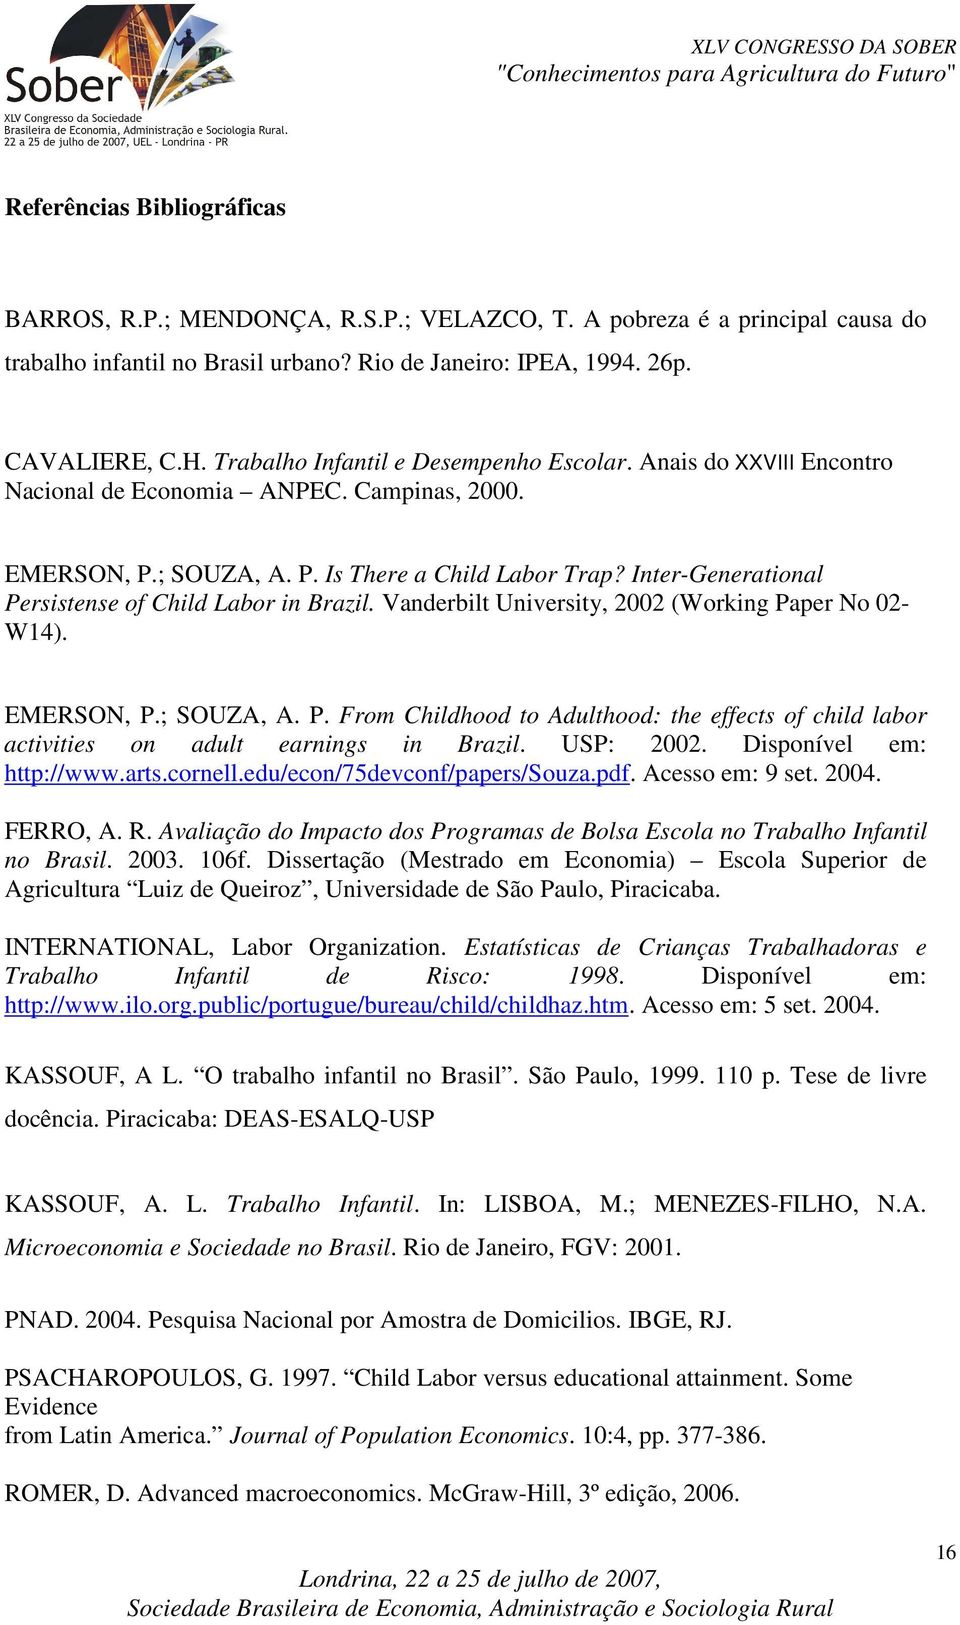 Iner-Generaional Persisense of Child Labor in Brazil. Vanderbil Universiy, 2002 (Working Paper No 02- W14). EMERSON, P.; SOUZA, A. P. From Childhood o Adulhood: he effecs of child labor aciviies on adul earnings in Brazil.